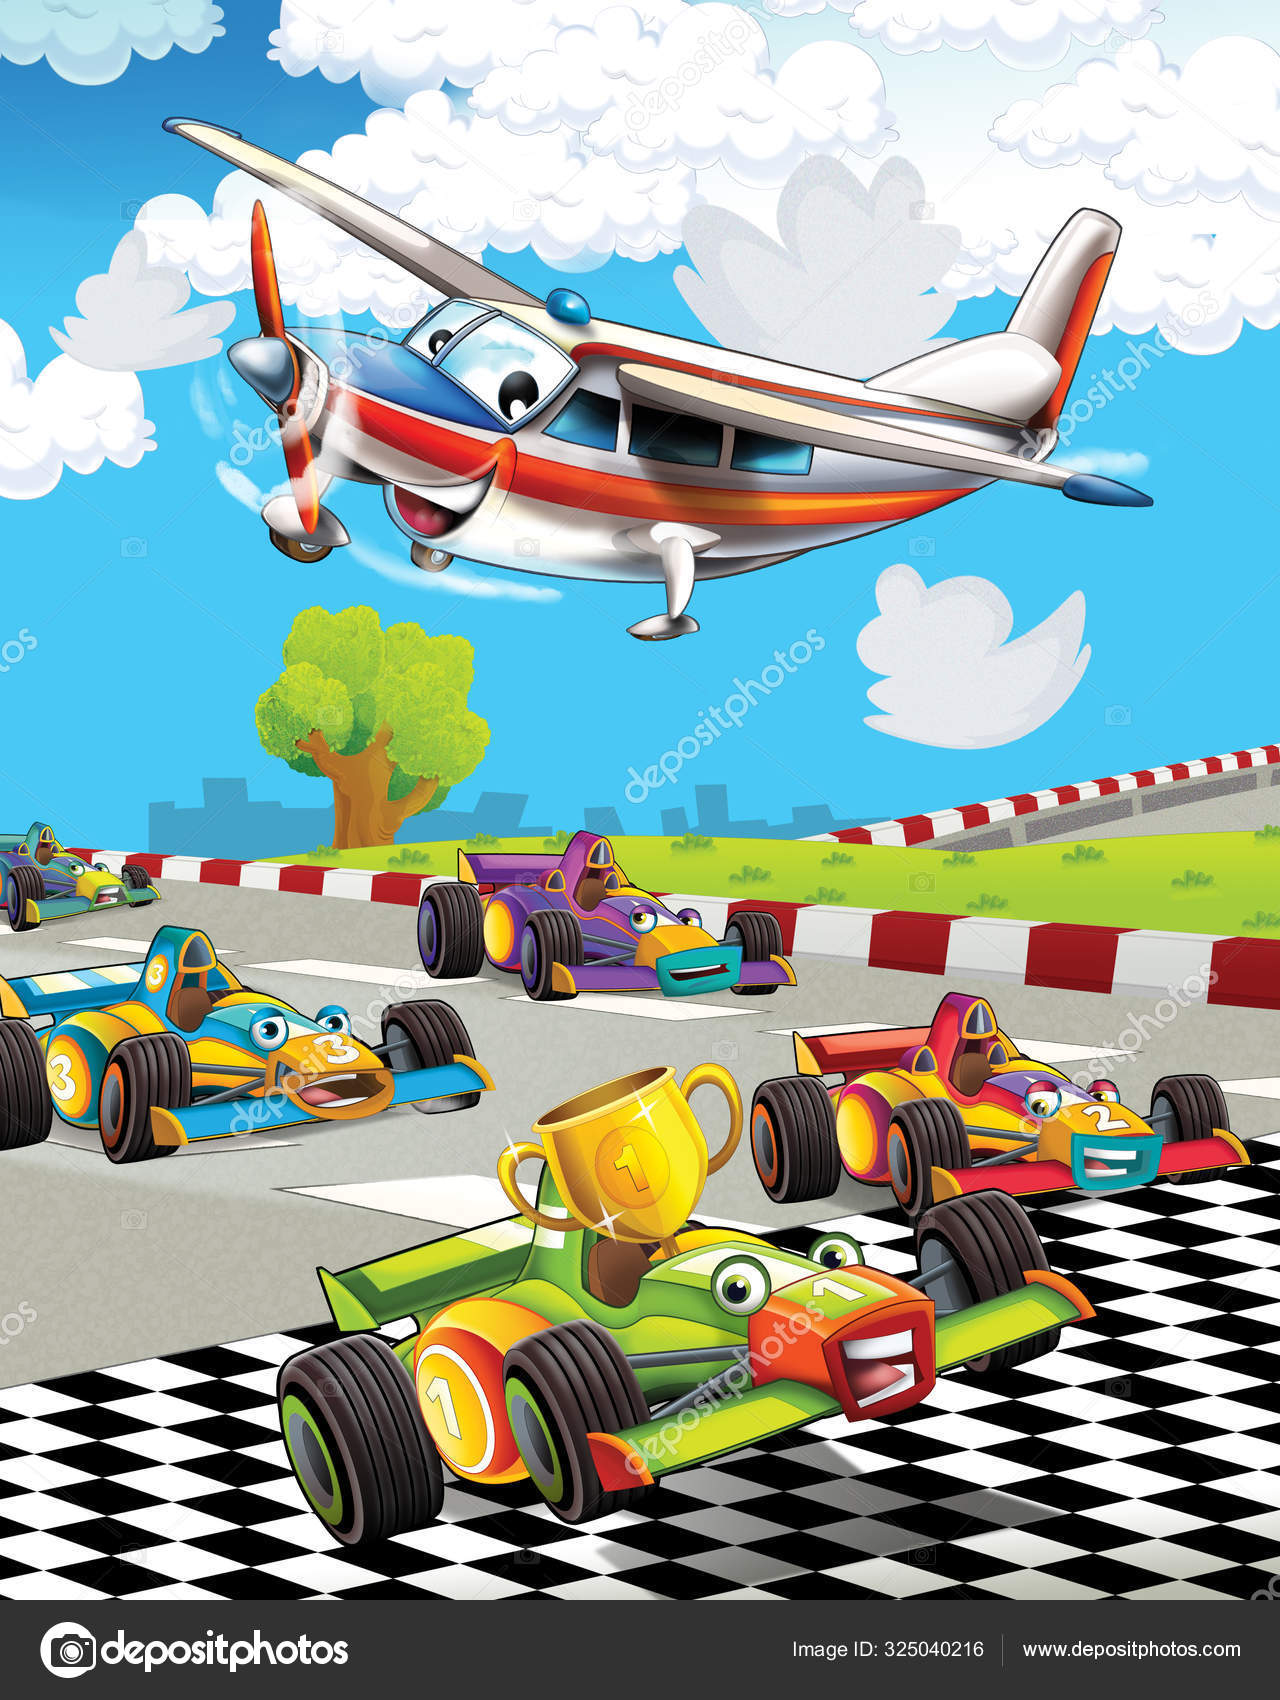 Cartoon scene with super car racing and observing plane is flying over -  illustration for children Stock Photo by ©illustrator_hft 325040216